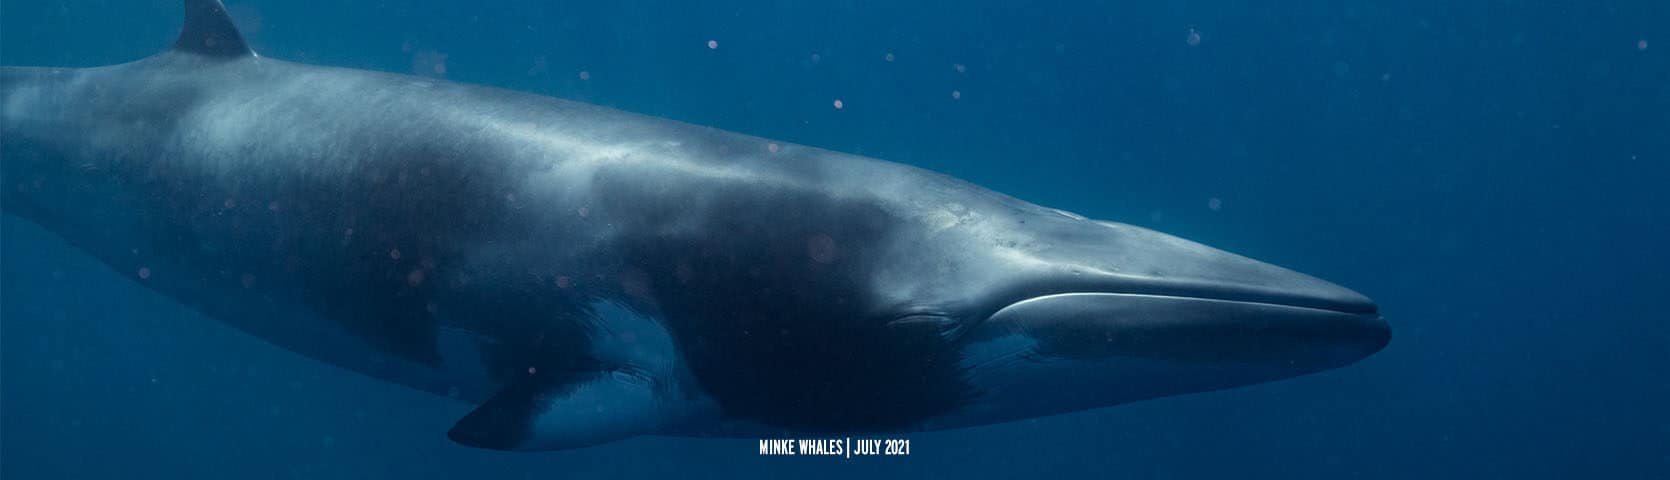 Minke Whales during the Citizen Science Voyage 2021